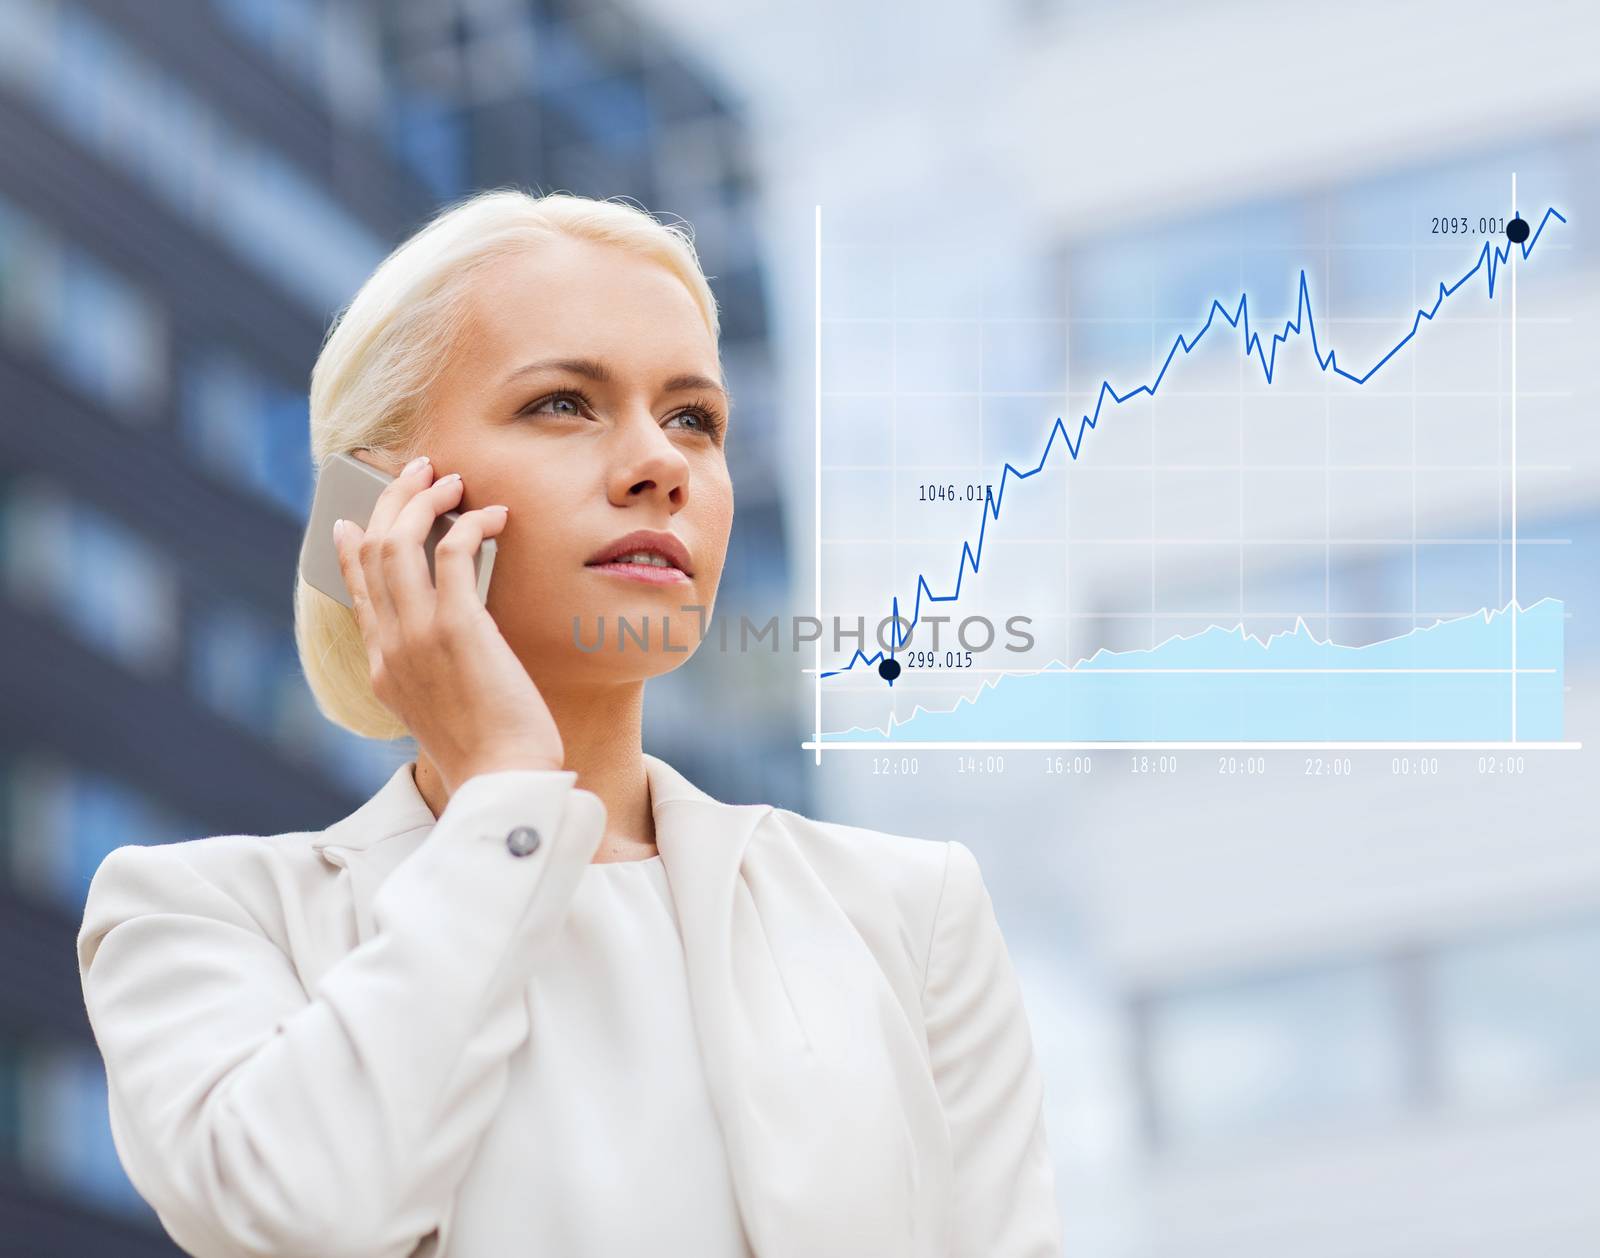 business, technology and people concept - serious businesswoman with smartphone talking over office building background